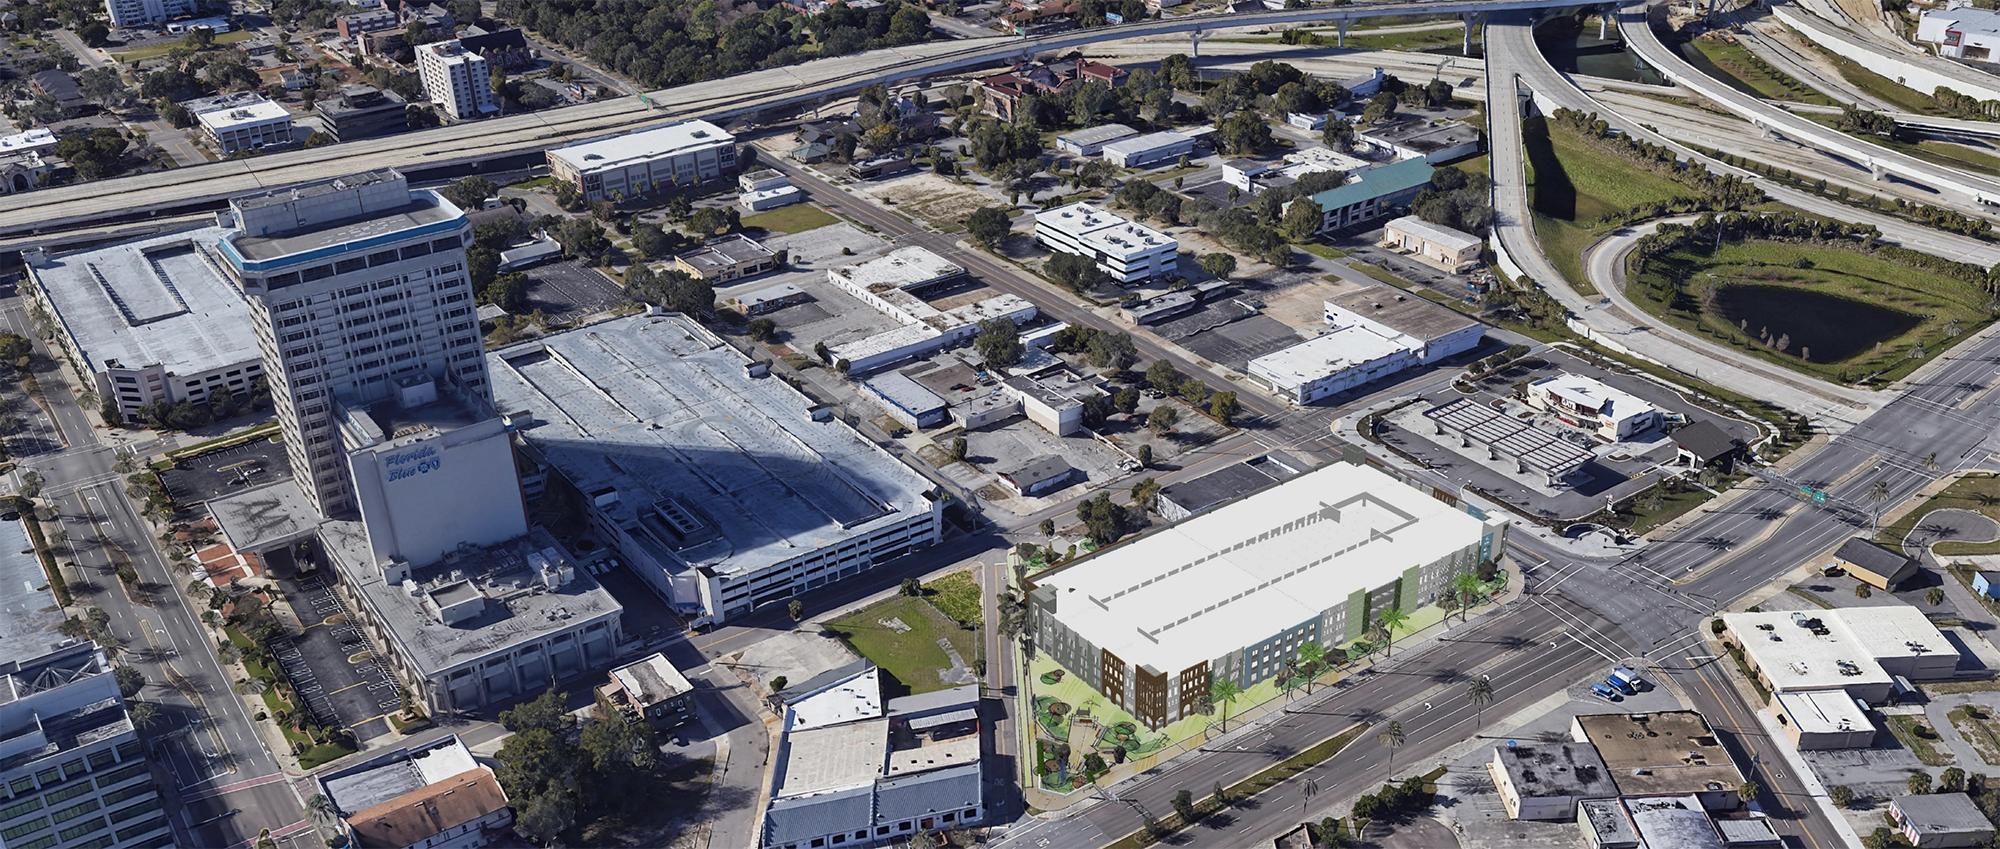 An aerial rendering shows the Florida Blue garage at Magnolia, Forest and Park streets near the Florida Blue headquarters on Riverside Avenue.